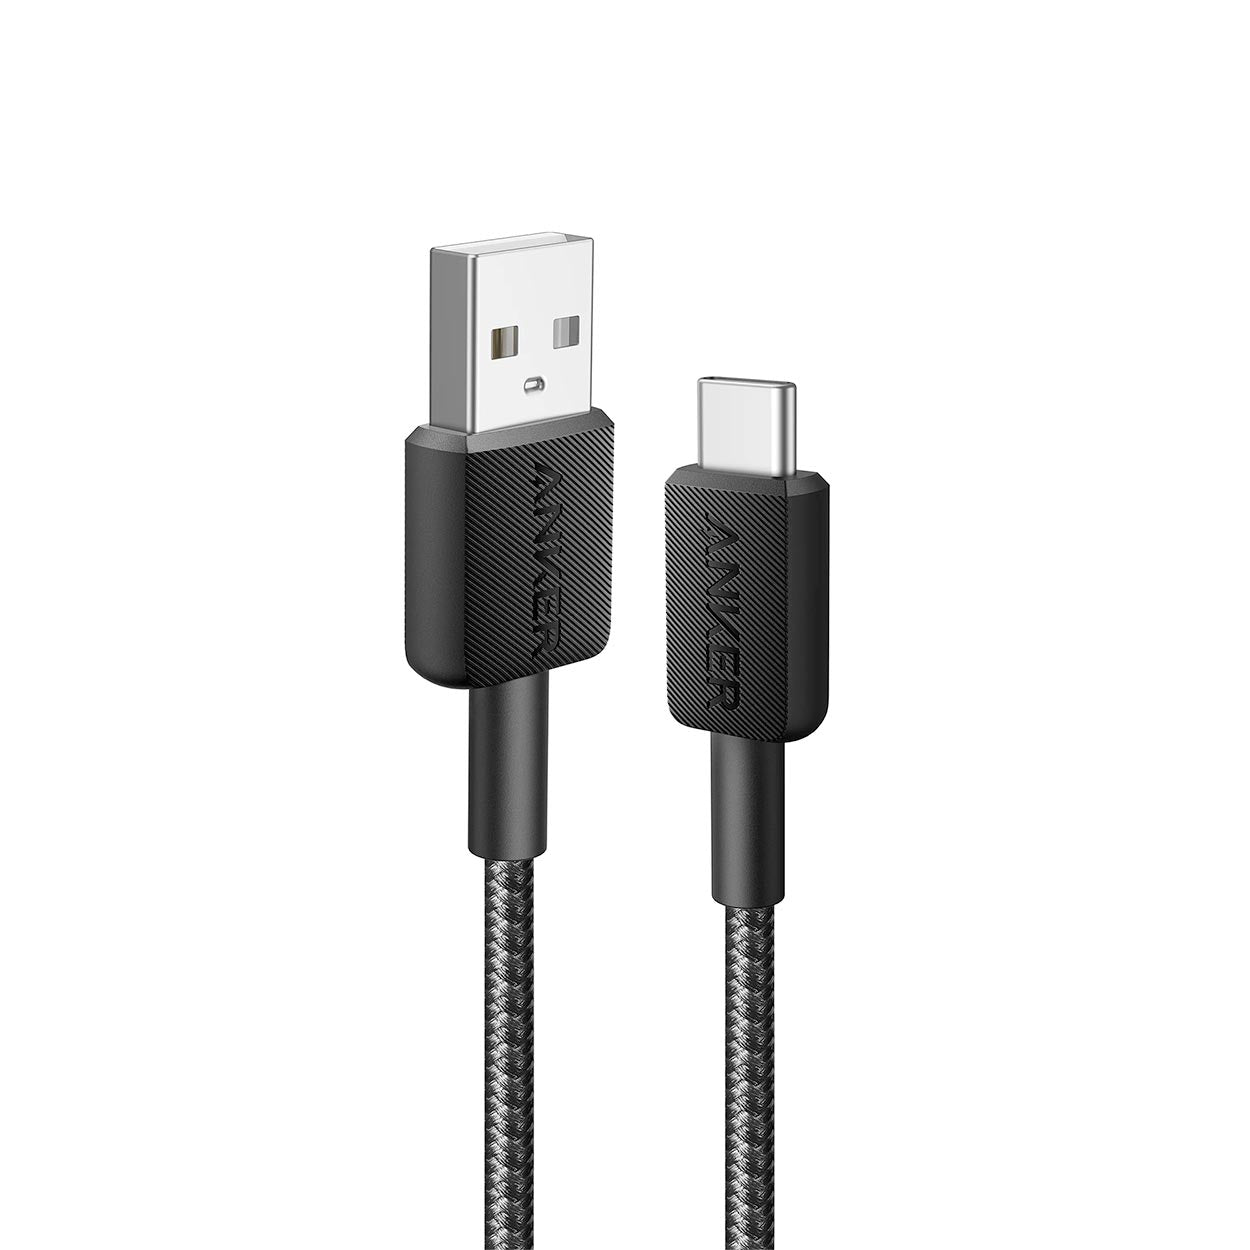 Anker 322 USB-A to USB-C Cable 1.8m (6ft) Braided